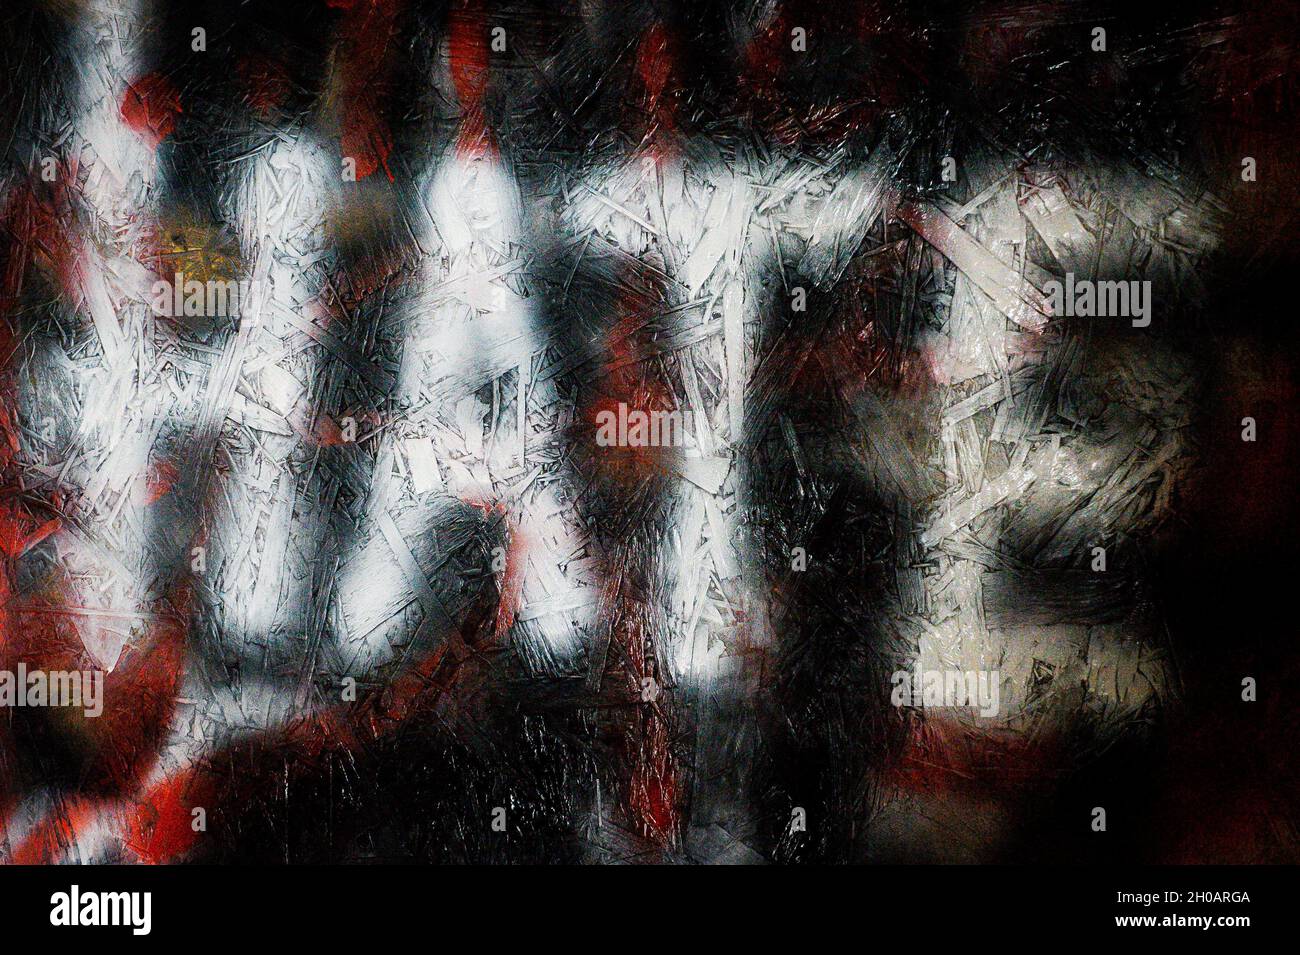 Undated file photo of graffiti on a wall.The number of hate crimes recorded by police in England and Wales has hit its highest level on record, with a 12% rise in racially motivated incidents, official figures show. There were 124,091 hate crimes recorded in the year to March 2021, according to Home Office statistics. Issue date: Tuesday October 12, 2021. Stock Photo